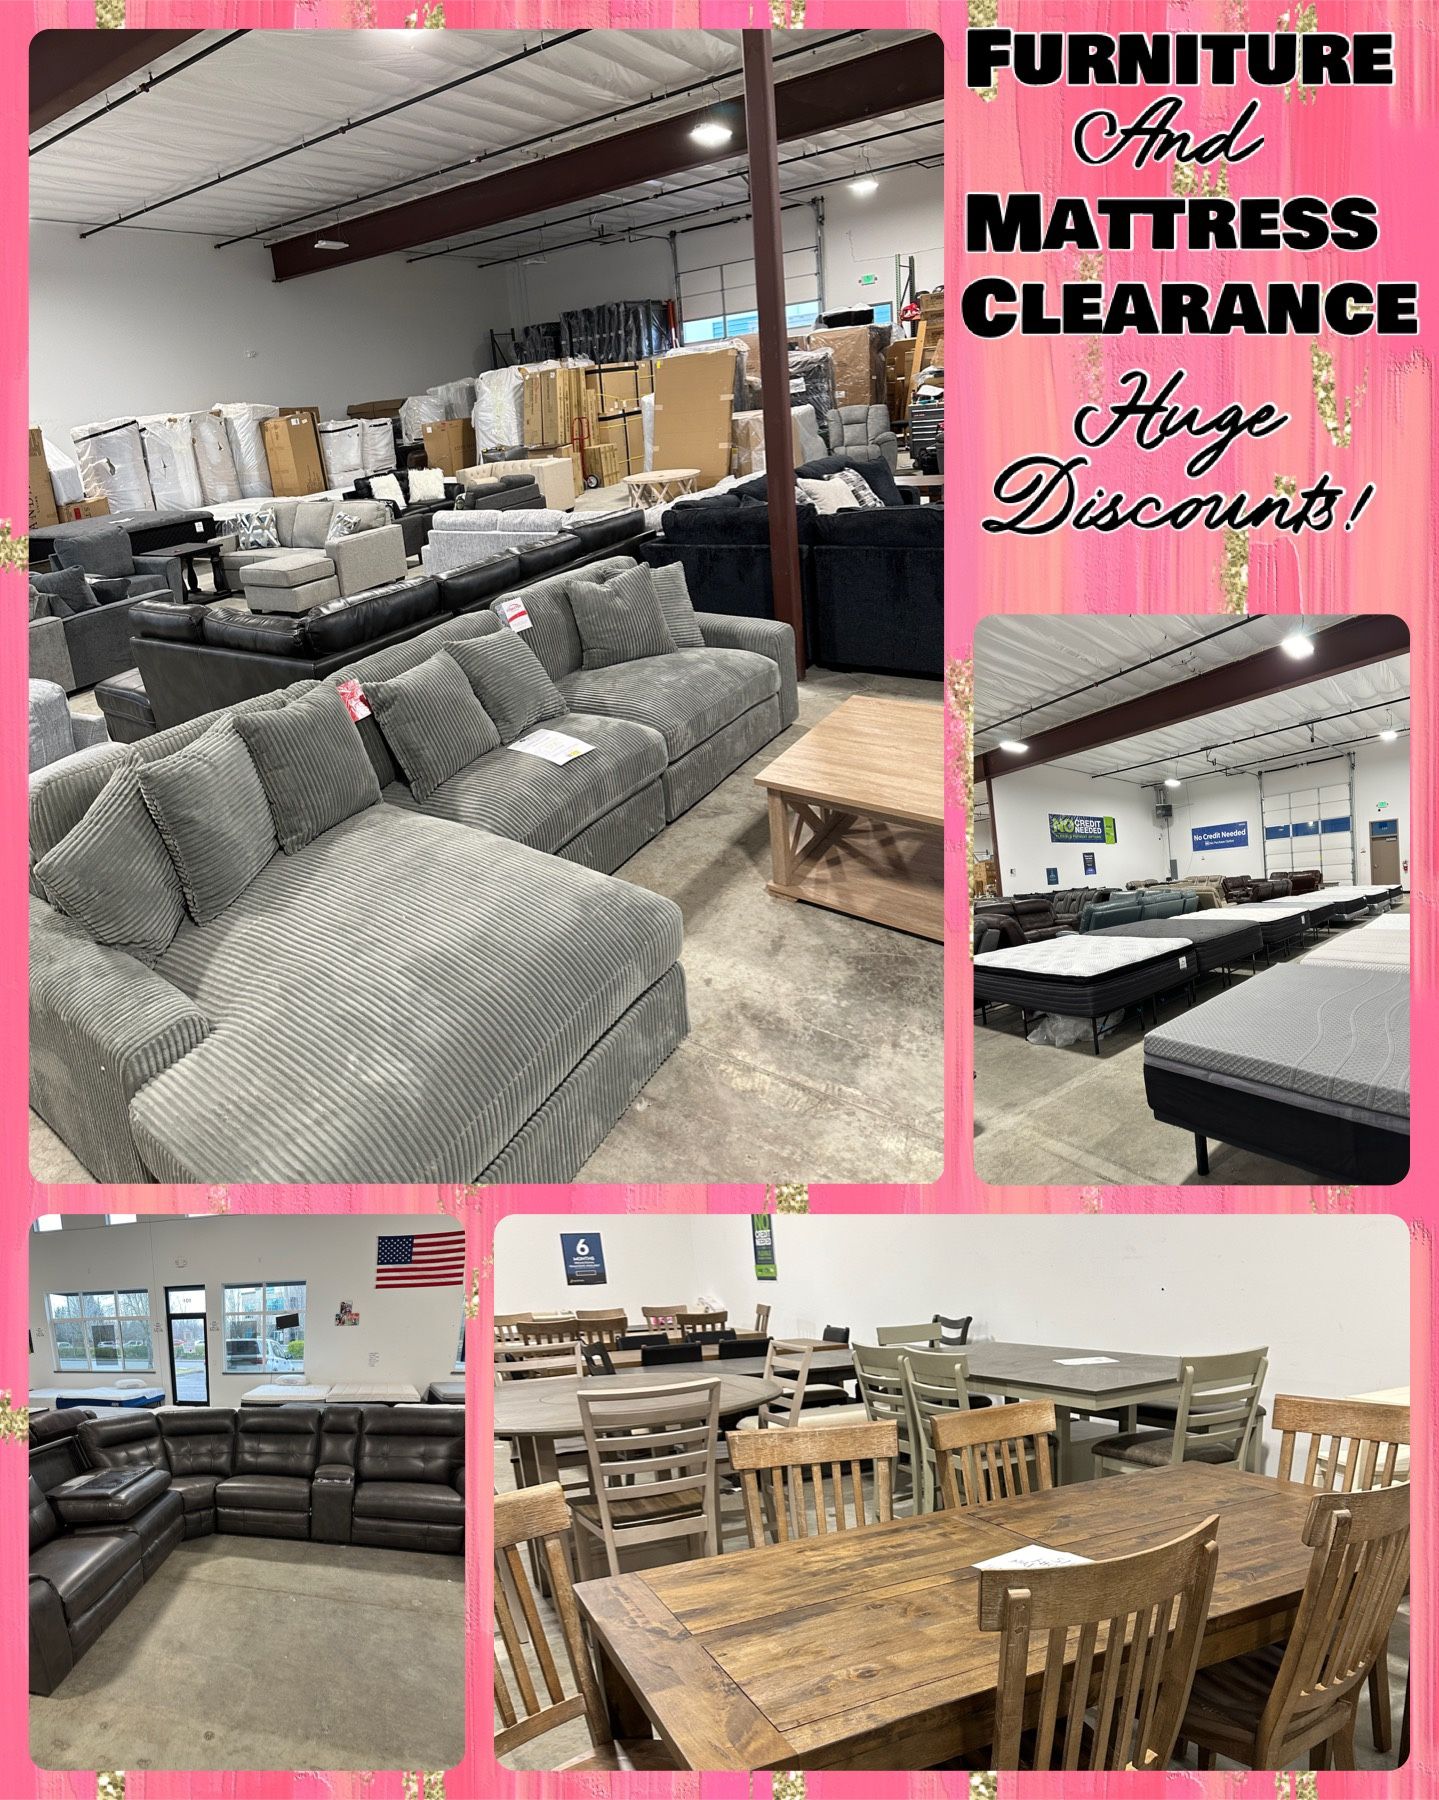 Mattresses And Sofas To Take Today!